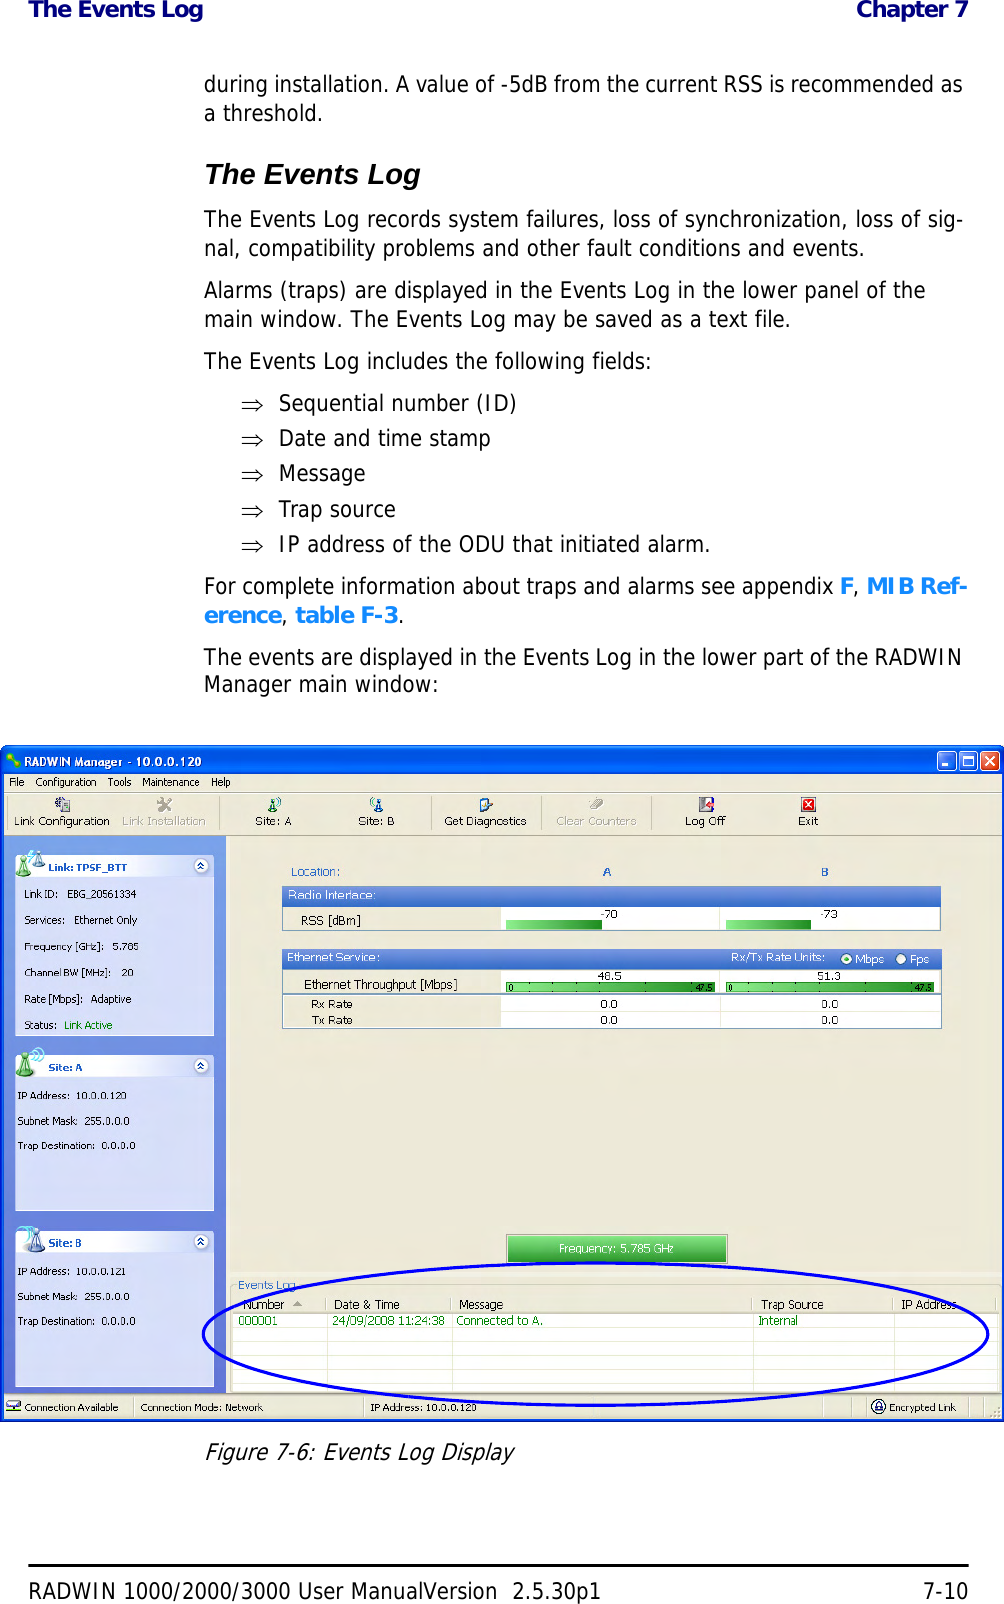 The Events Log  Chapter 7RADWIN 1000/2000/3000 User ManualVersion  2.5.30p1 7-10during installation. A value of -5dB from the current RSS is recommended as a threshold.The Events LogThe Events Log records system failures, loss of synchronization, loss of sig-nal, compatibility problems and other fault conditions and events.Alarms (traps) are displayed in the Events Log in the lower panel of the main window. The Events Log may be saved as a text file.The Events Log includes the following fields:⇒Sequential number (ID)⇒Date and time stamp⇒Message⇒Trap source⇒IP address of the ODU that initiated alarm.For complete information about traps and alarms see appendix F, MIB Ref-erence, table F-3.The events are displayed in the Events Log in the lower part of the RADWIN Manager main window:Figure 7-6: Events Log Display